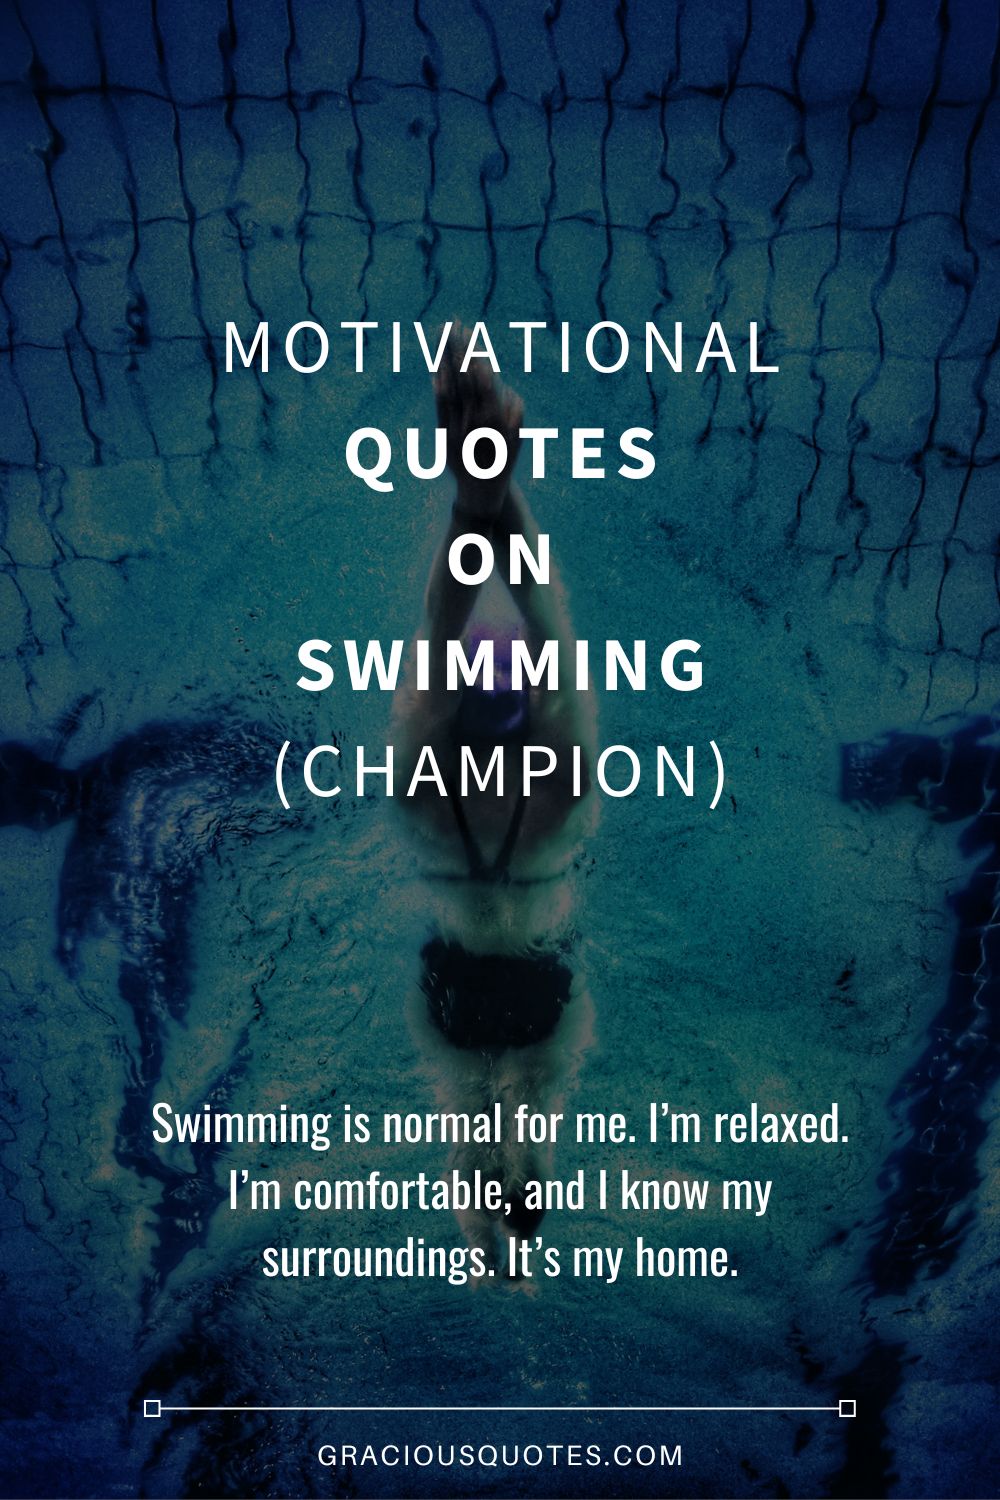 Motivational Quotes on Swimming (CHAMPION) - Gracious Quotes